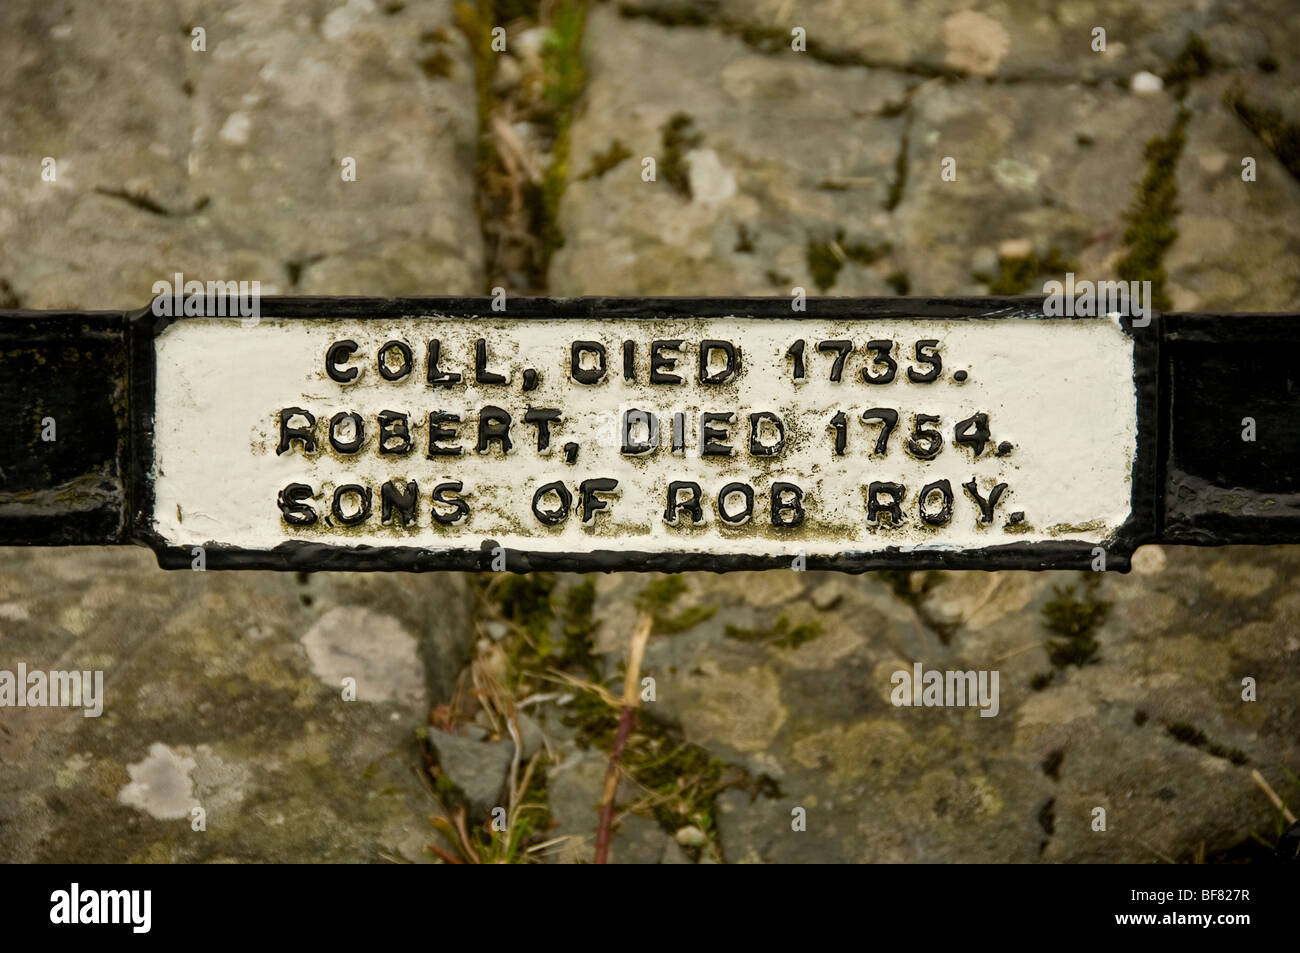 Closeup of Coll and Robert MacGregor's (sons of Rob Roy) name plaque on Rob Roy's family grave. Balquhidder. Scotland Stock Photo